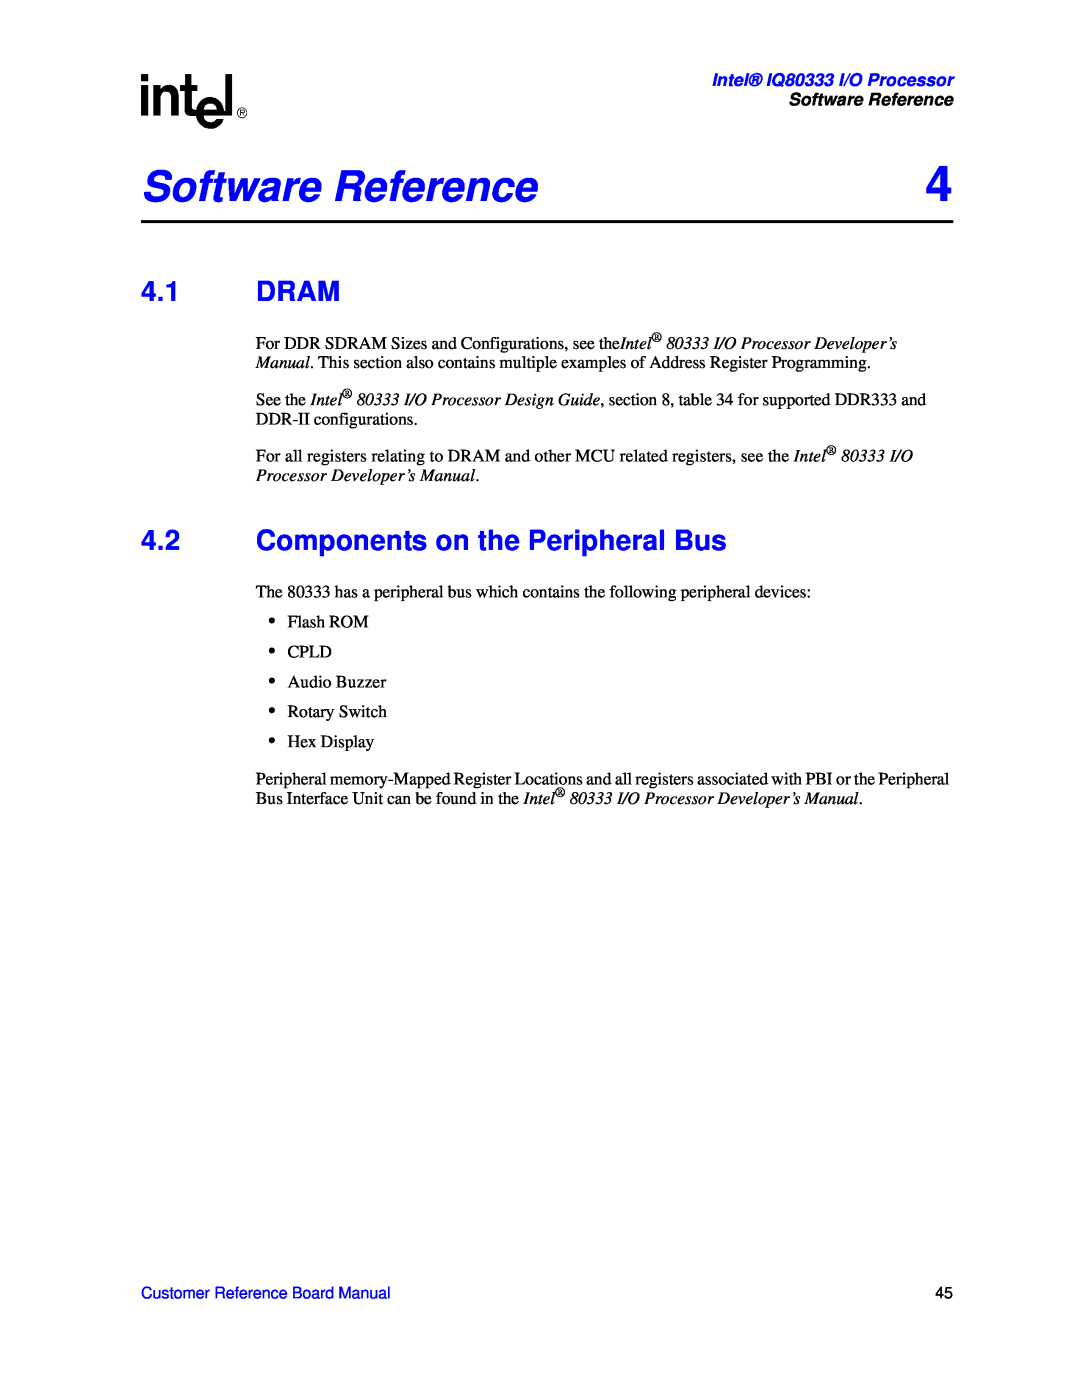 Intel manual Software Reference, 4.1DRAM, 4.2Components on the Peripheral Bus, Intel IQ80333 I/O Processor 